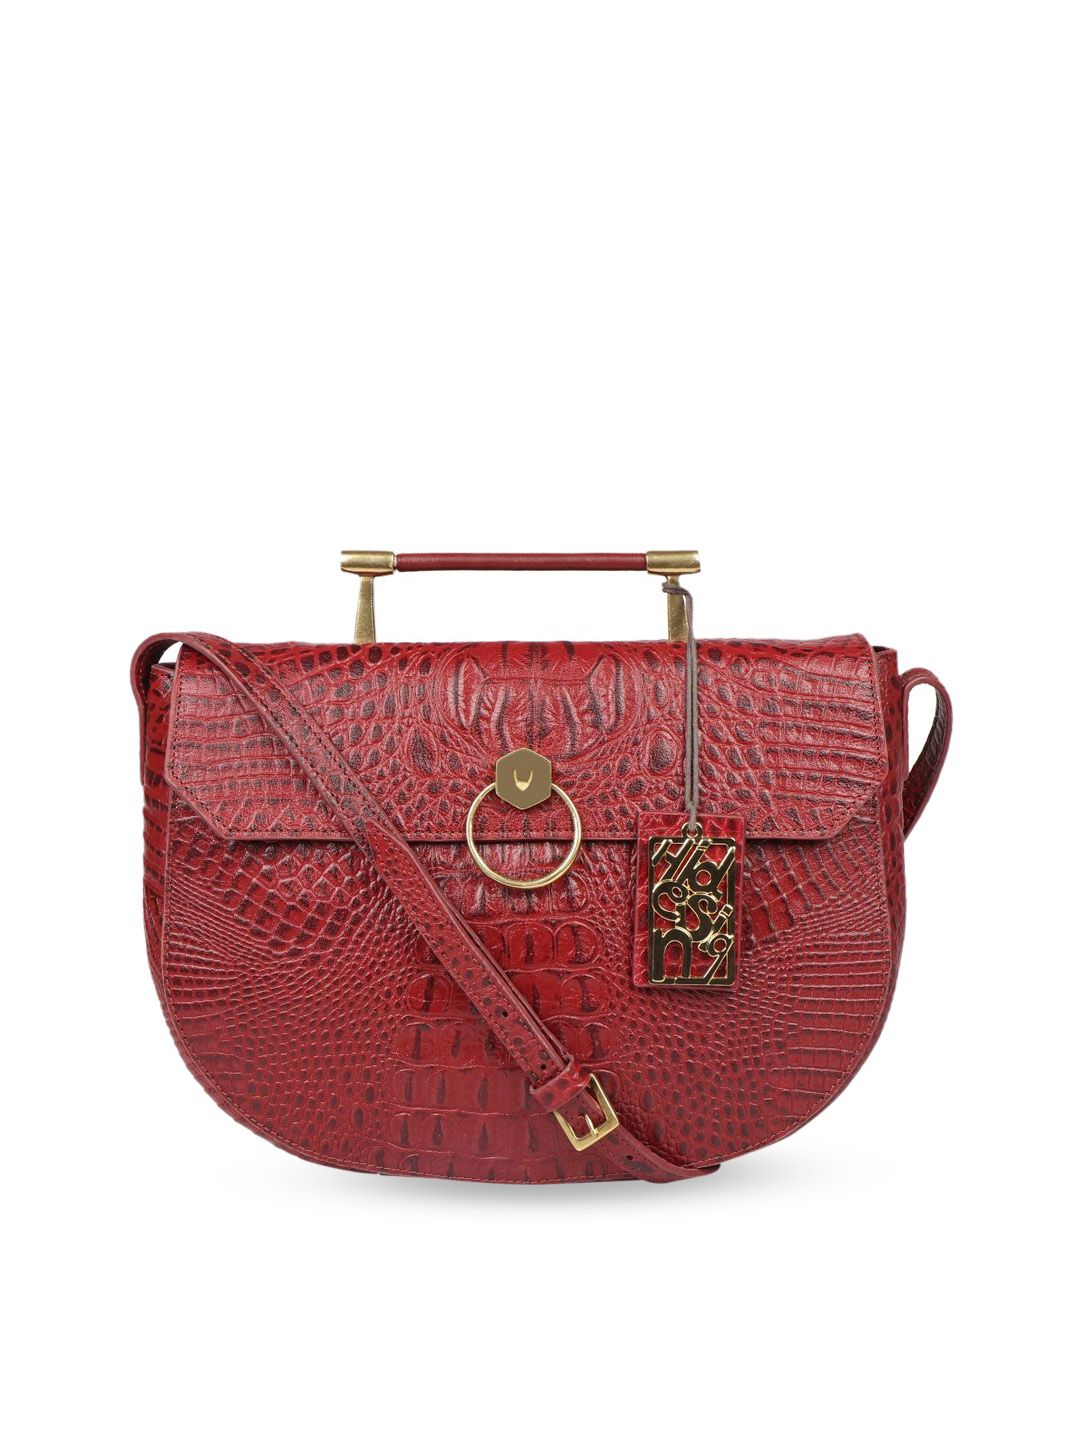 Hidesign Red Textured Leather Half Moon Sling Bag with Cut Work Price in India